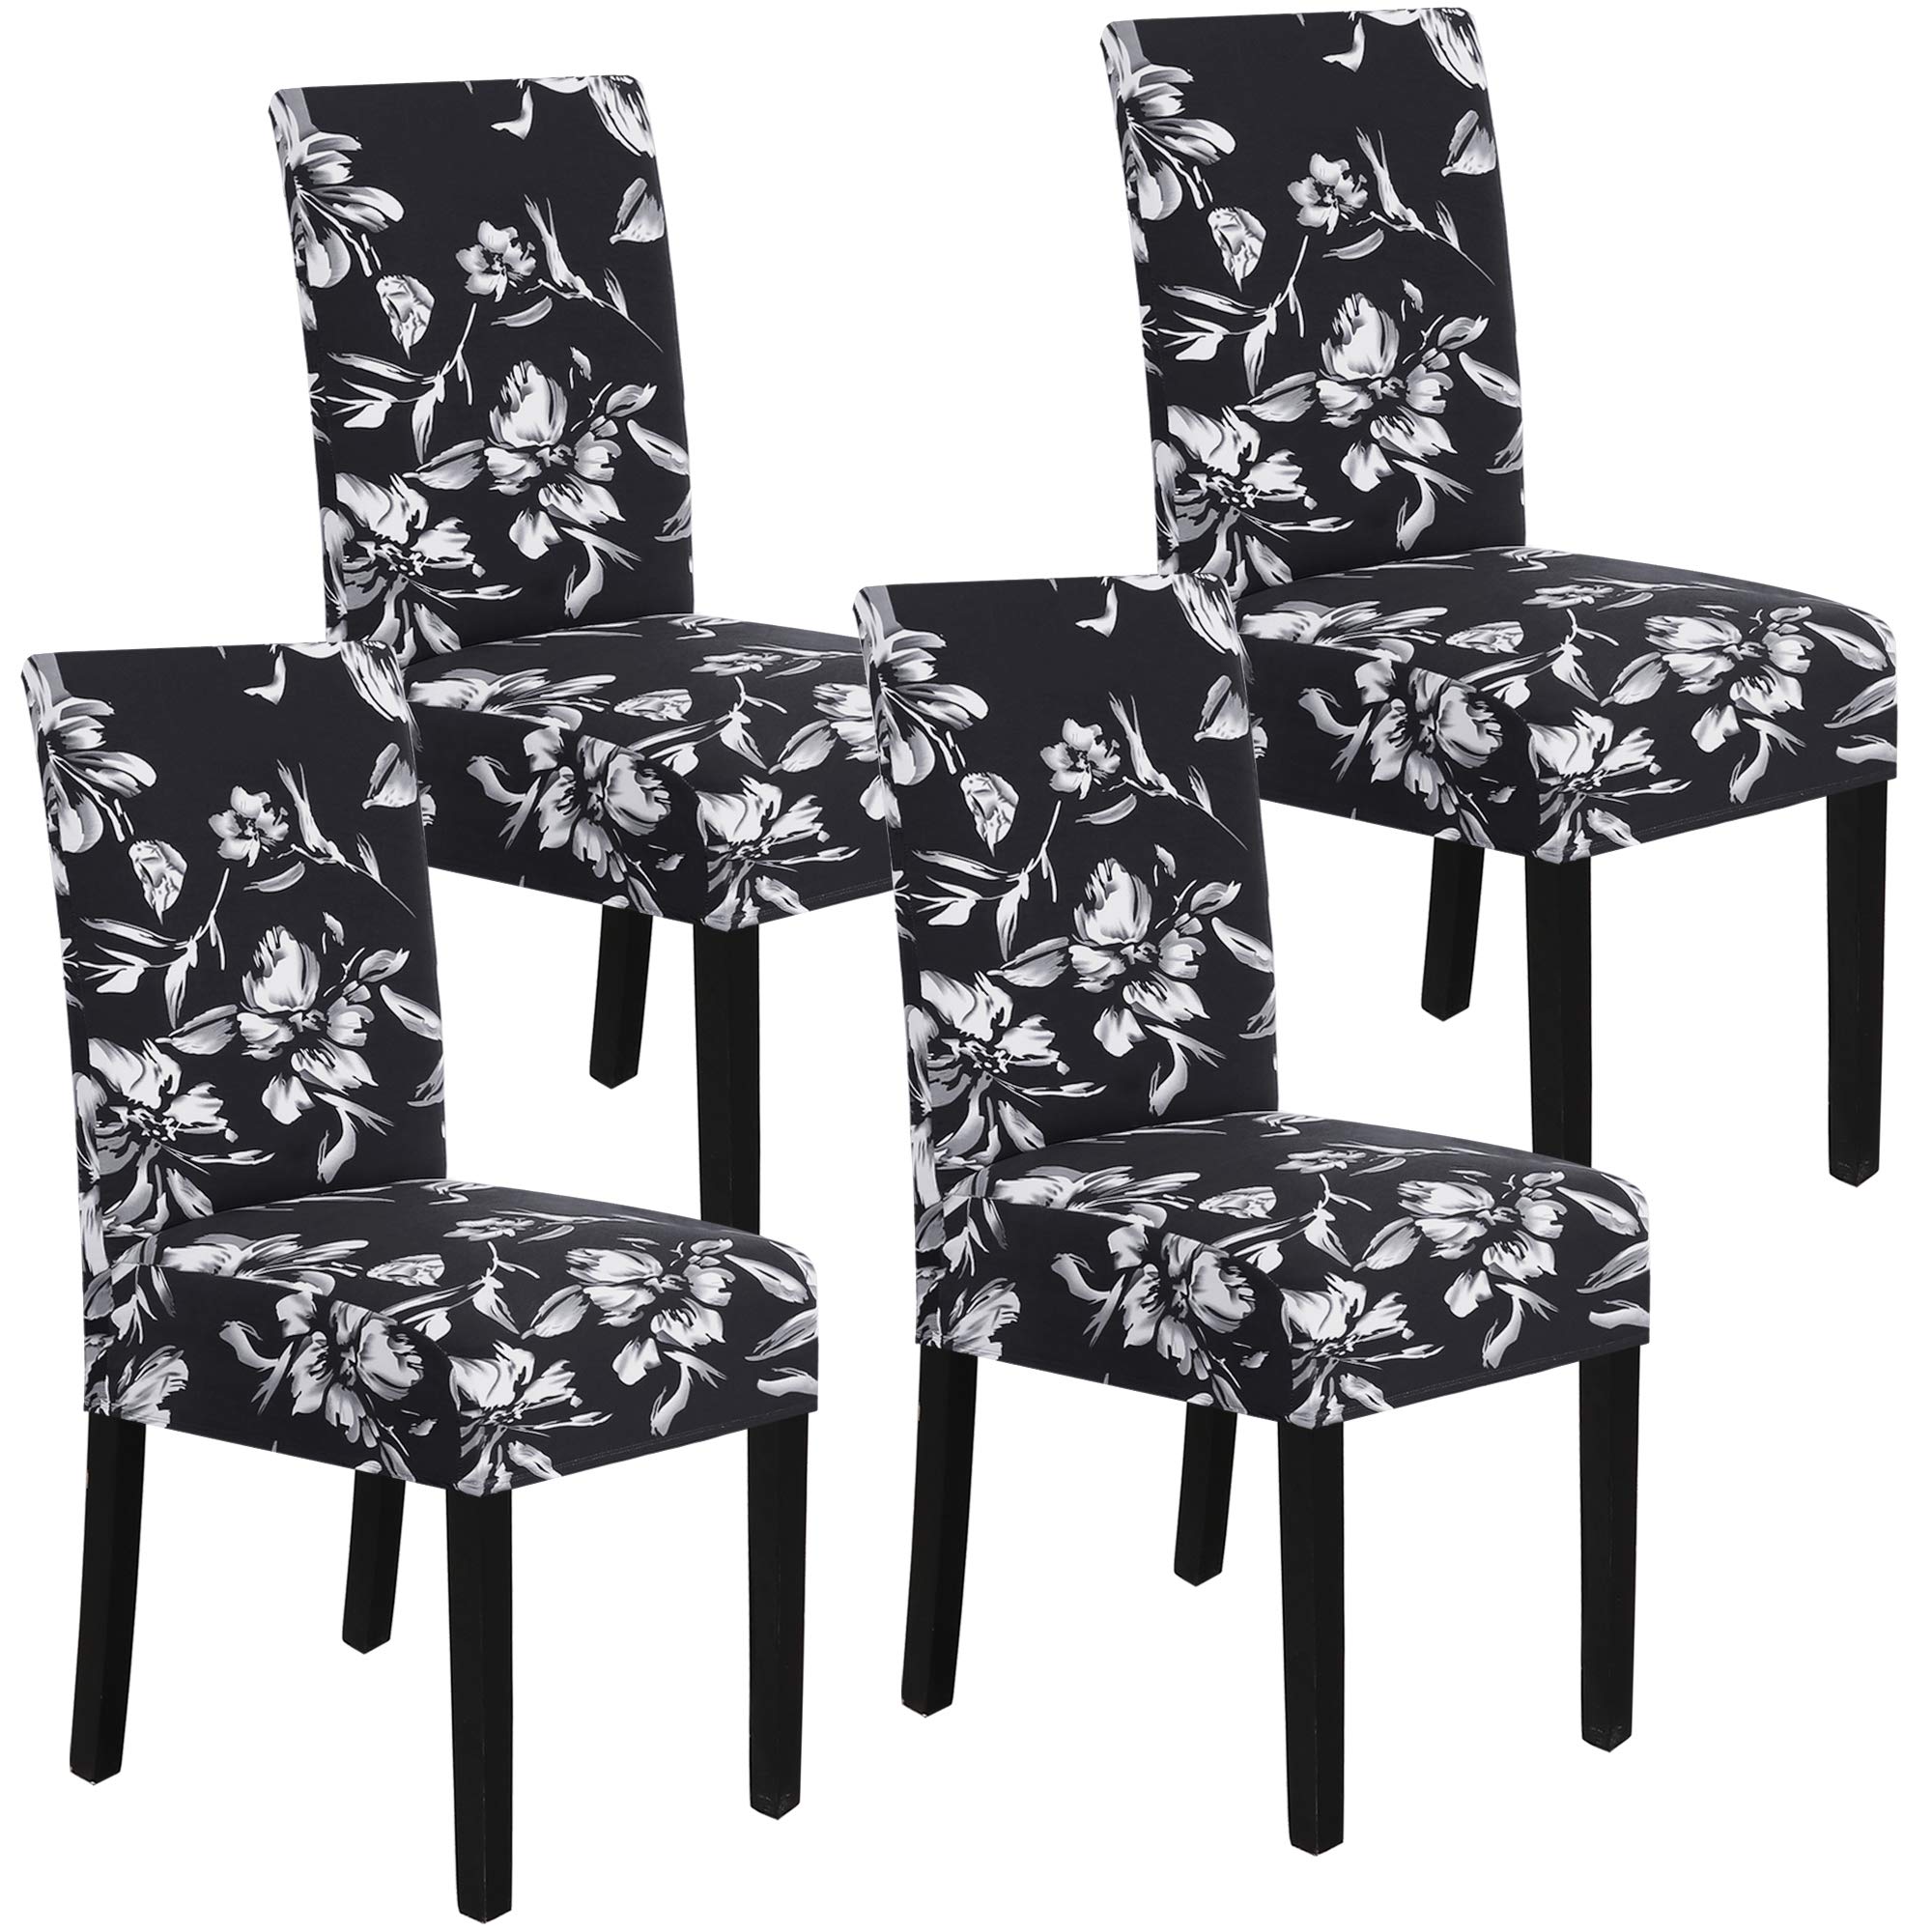 H.VERSAILTEX Stretch Dining chair covers Set of 4 chair covers for Dining Room Parsons chair Slipcover chair Protectors covers D